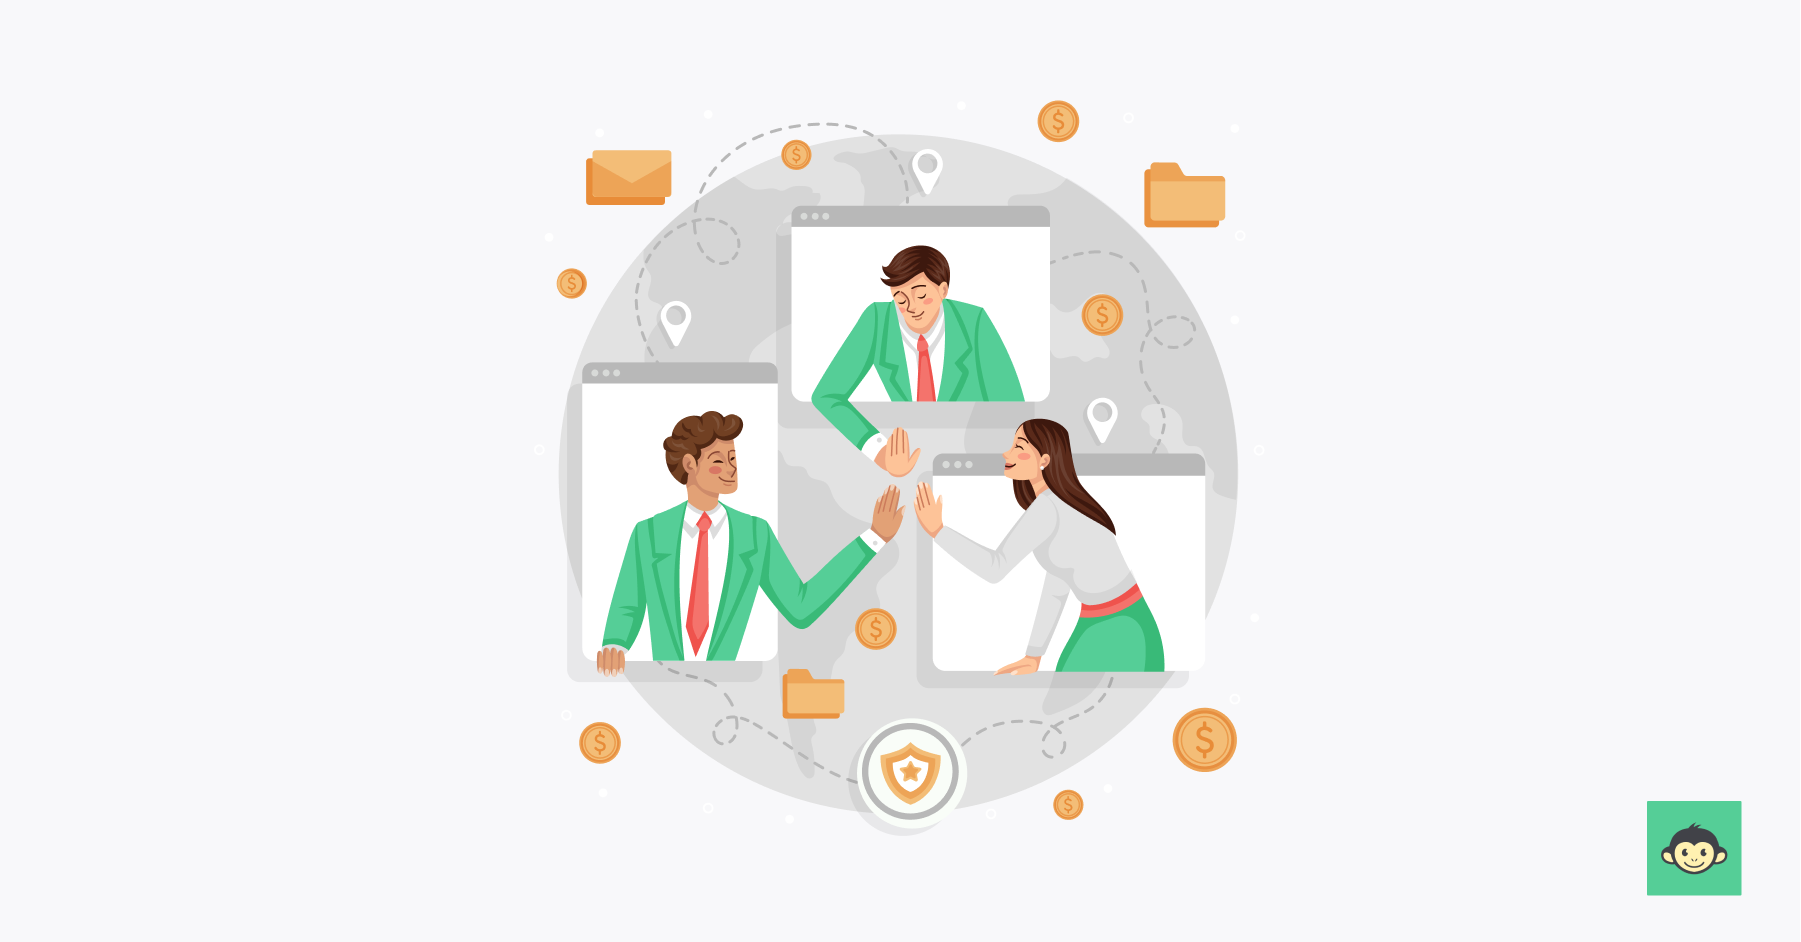 The objective of an employee referral program